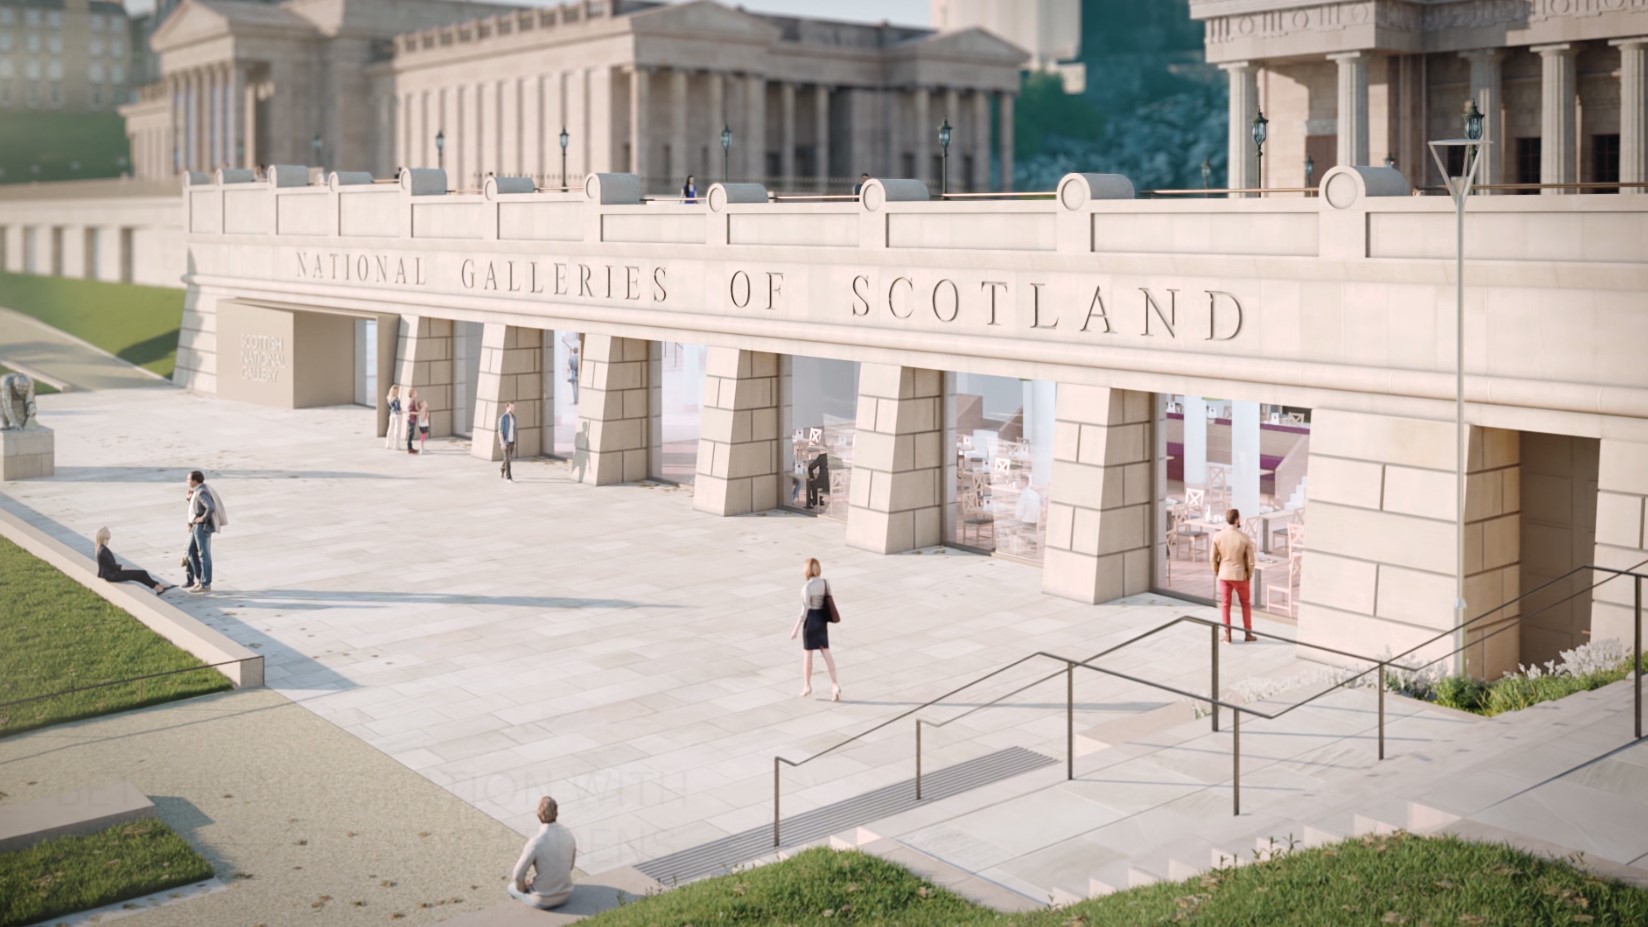 The Scottish National Gallery Project - National Galleries of Scotland